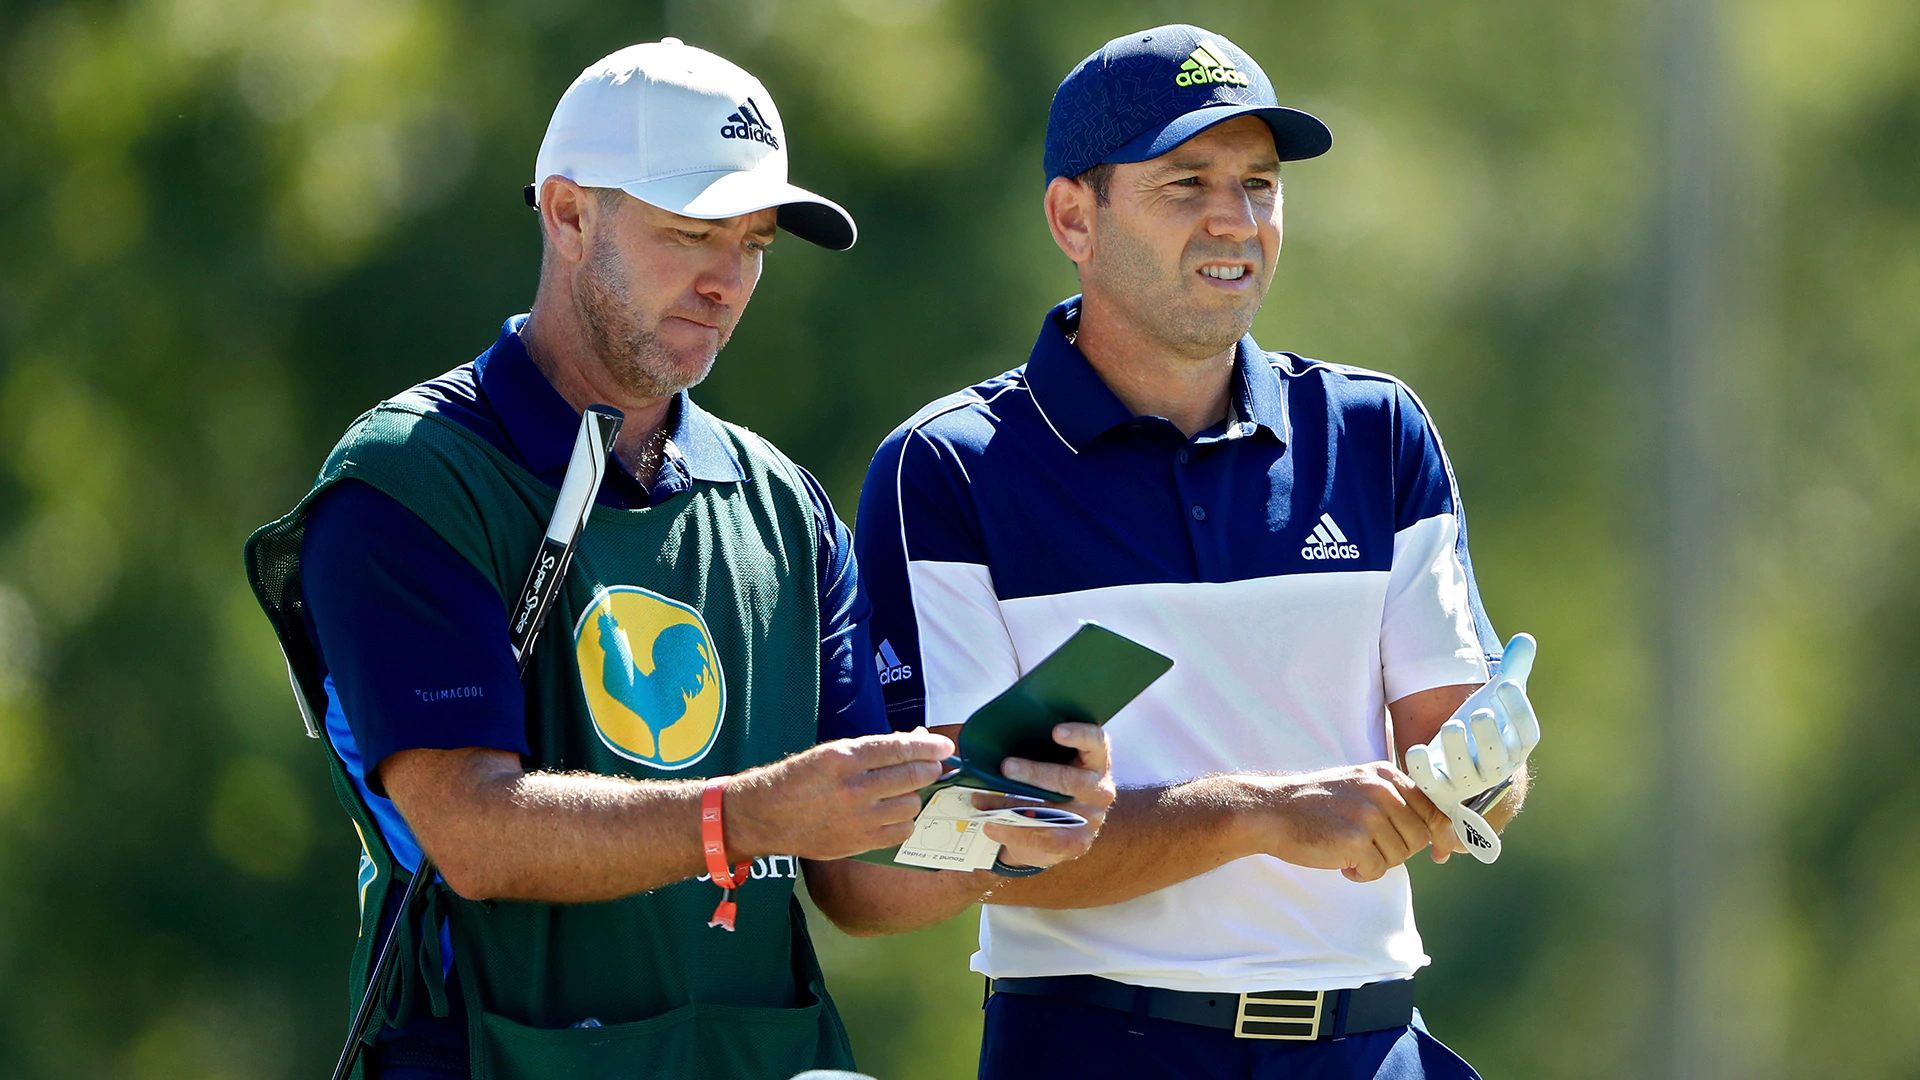 Putting with Eyes Closed, Sergio Garcia in the Mix at Sanderson Farms